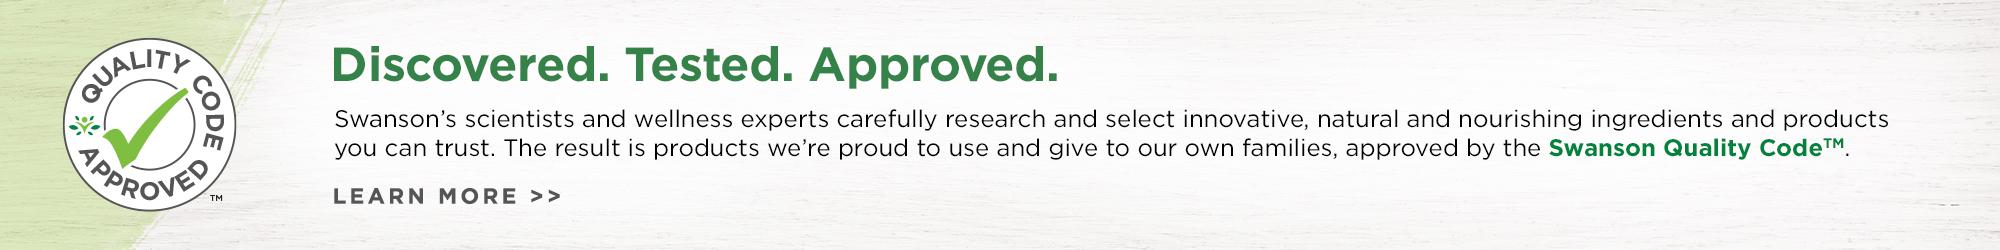 Discovered. Tested. Approved. Swanson's scientists and wellness carefully research and select innovative, natural and nourishing ingredients and products you can trust. The result is products we're proud to use and give to our own families, approved by the Swanson Quality Code.